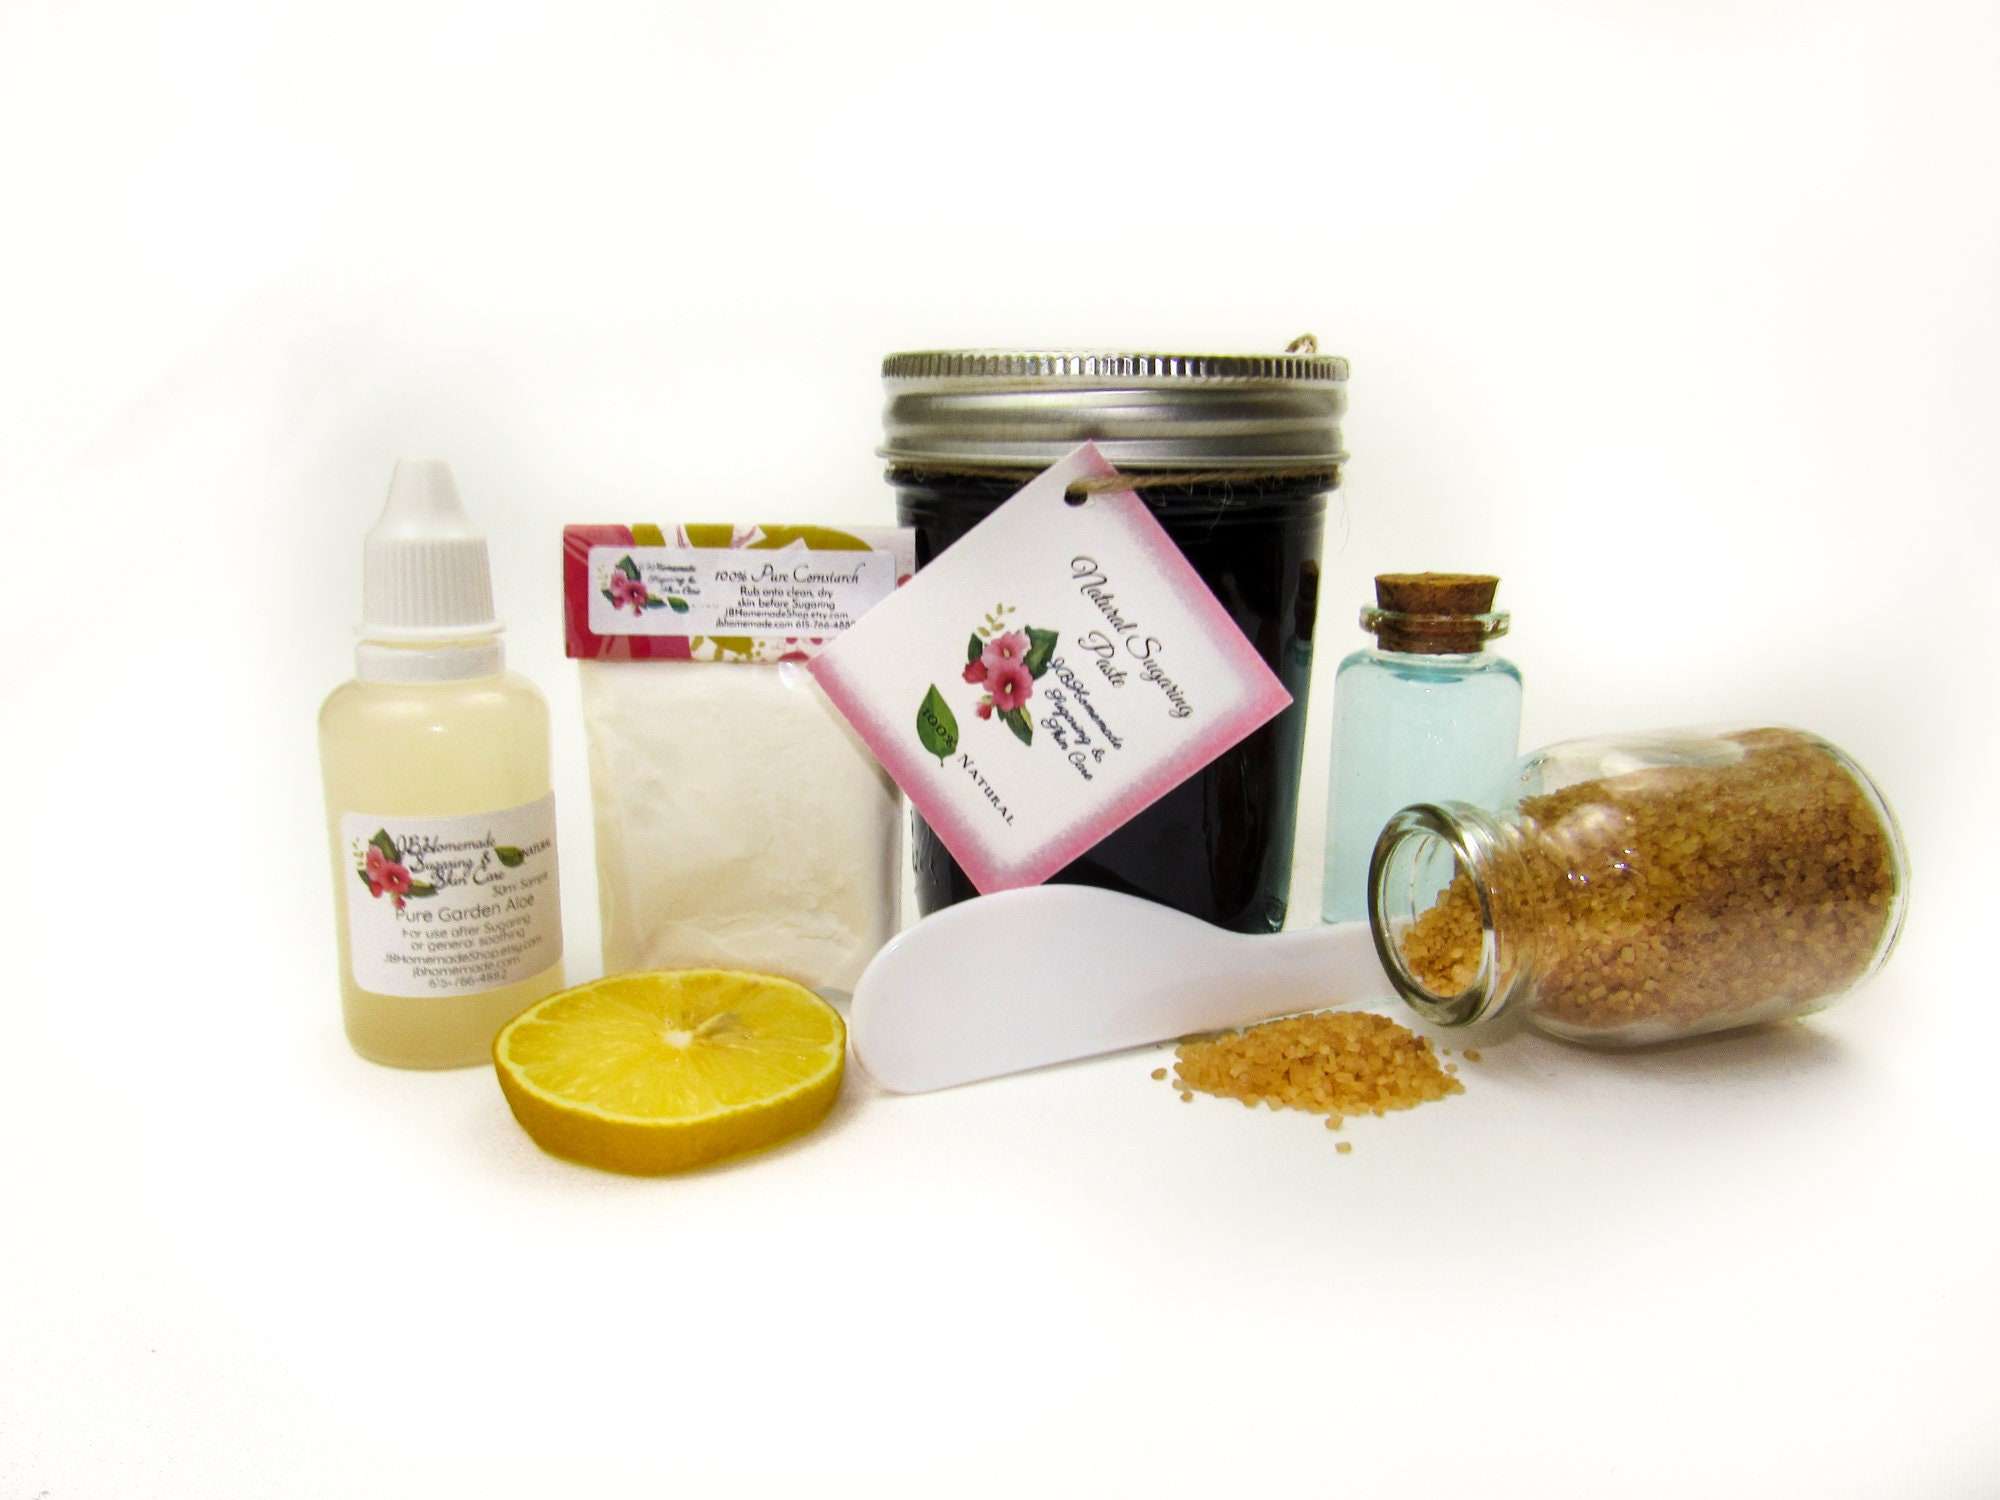 An 8-ounce jar of JBHomemade Sugaring Paste is presented with its included pouch of cornstarch, bottle of aloe vera and applicator next to a slice of fresh lemon, a glass jar filled with clear blue water, and another jar tipped over, spilling raw sugar, accentuating the natural ingredients.